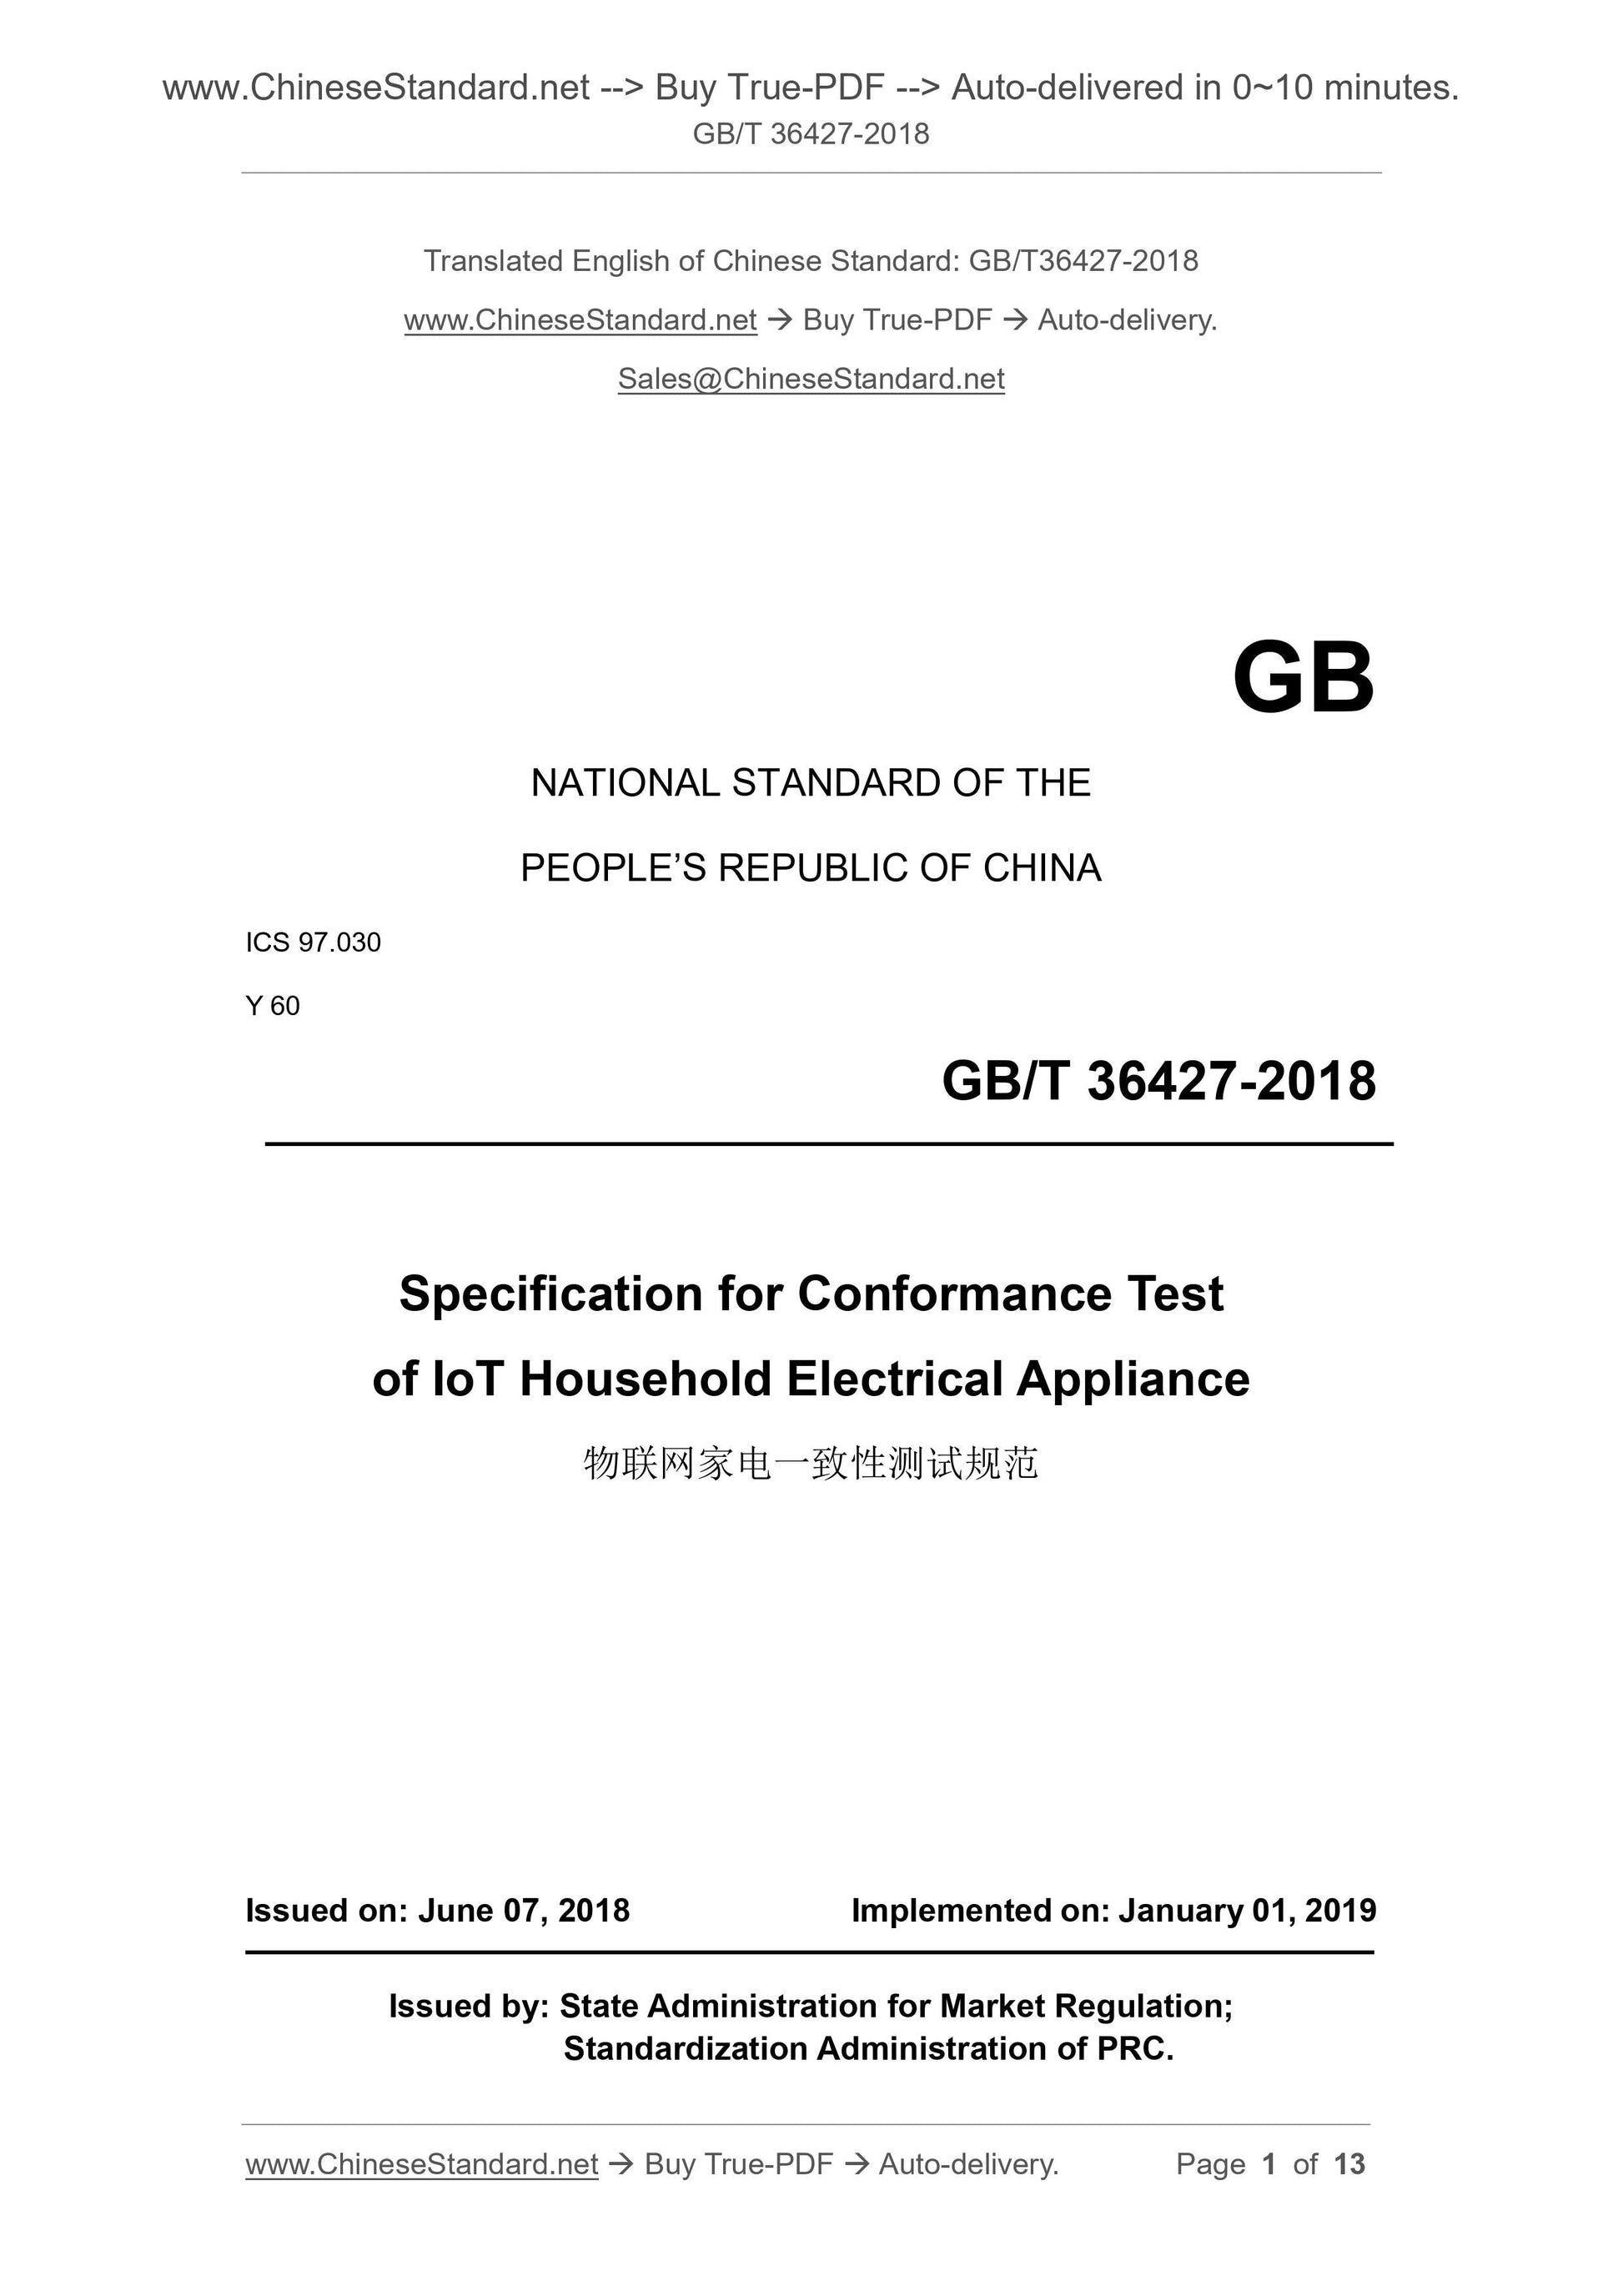 GB/T 36427-2018 Page 1